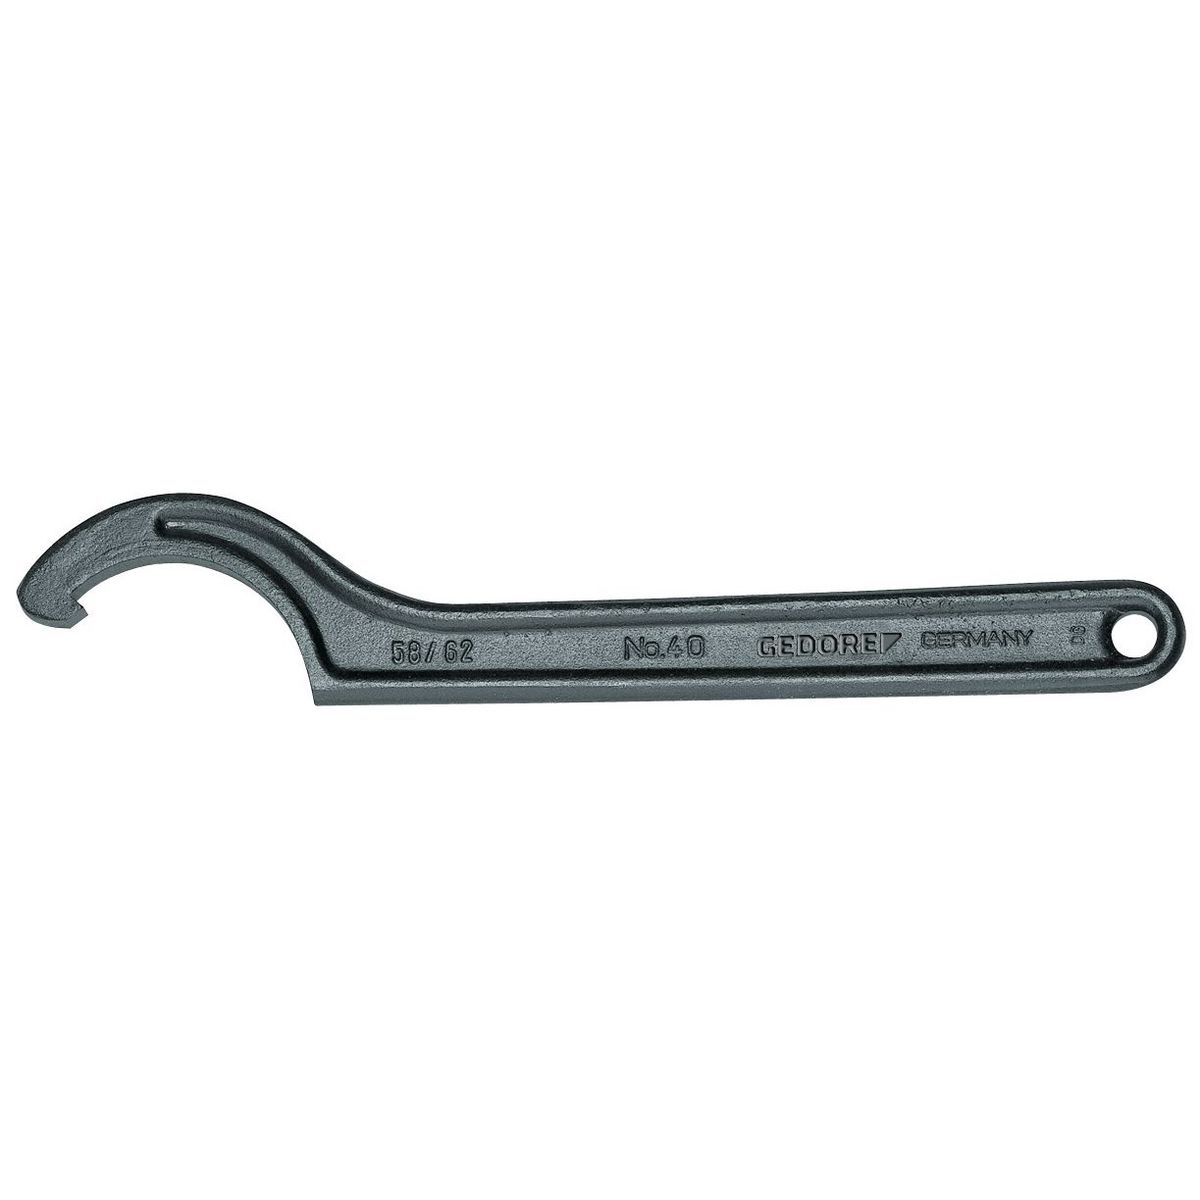 Hook wrench with lug, 16-20mm No.40 16-20 Gedore